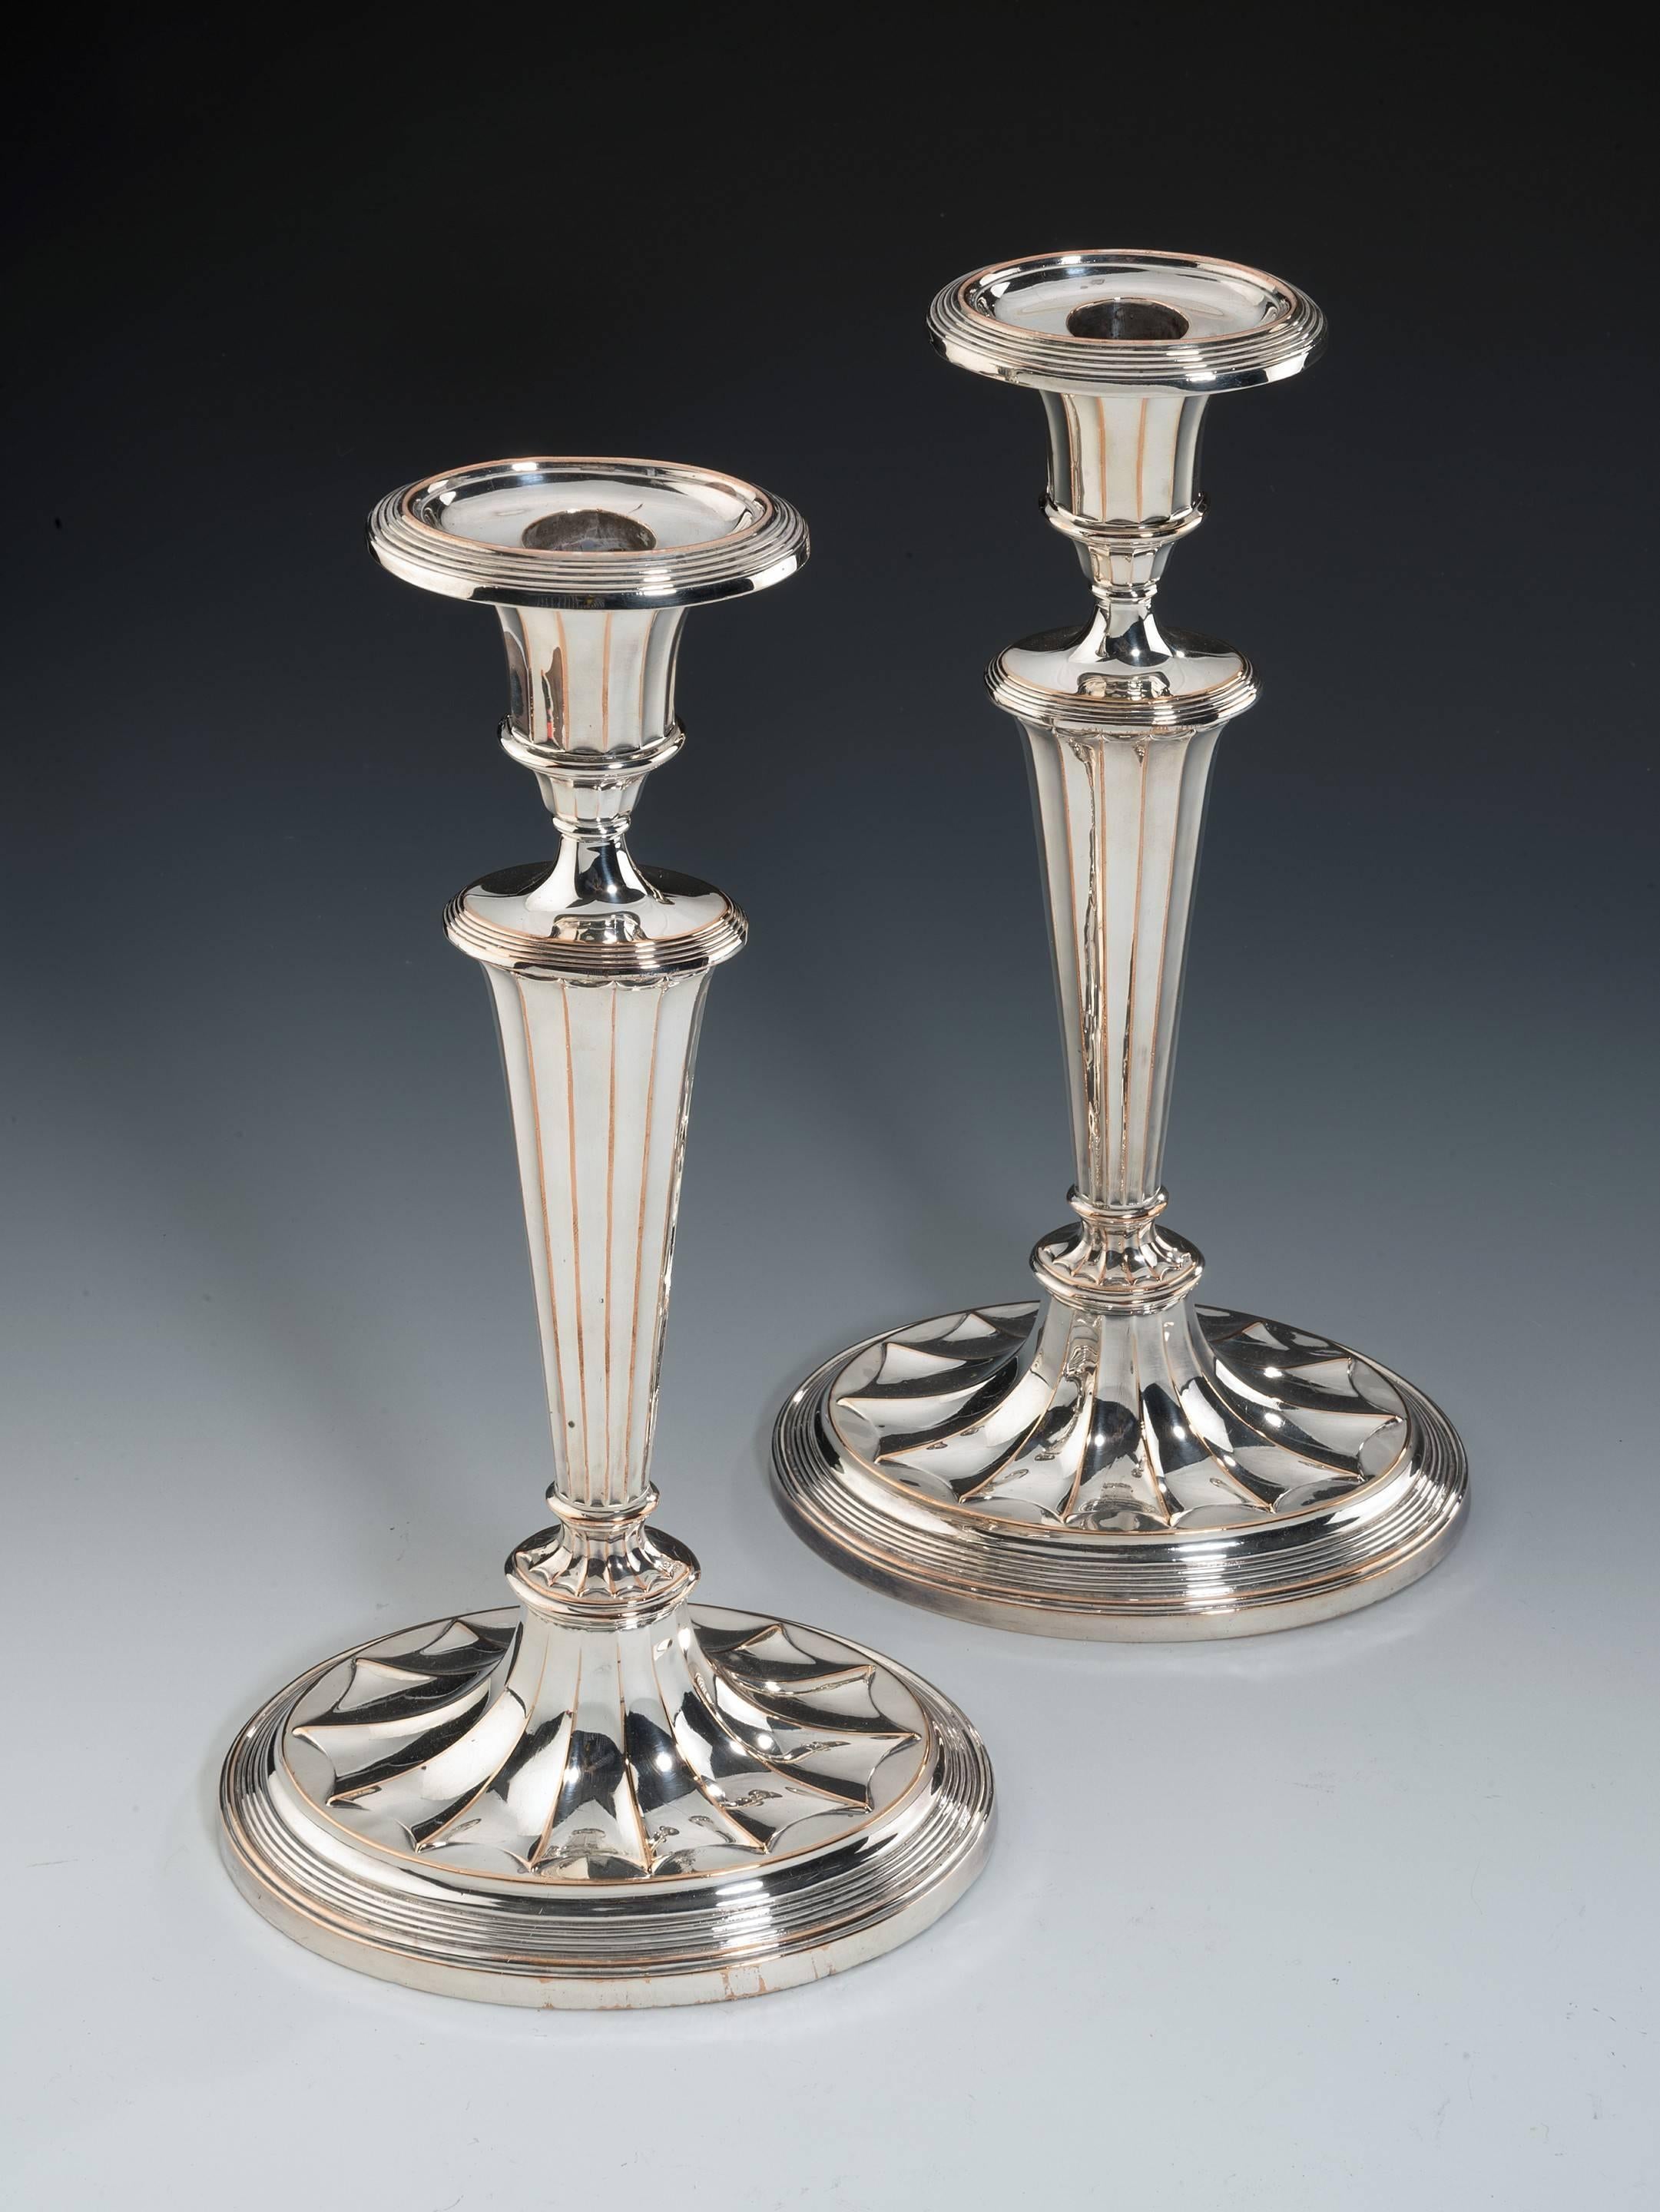 Old Sheffield oval based candlesticks by John Parsons & Co, George III period, circa 1785.